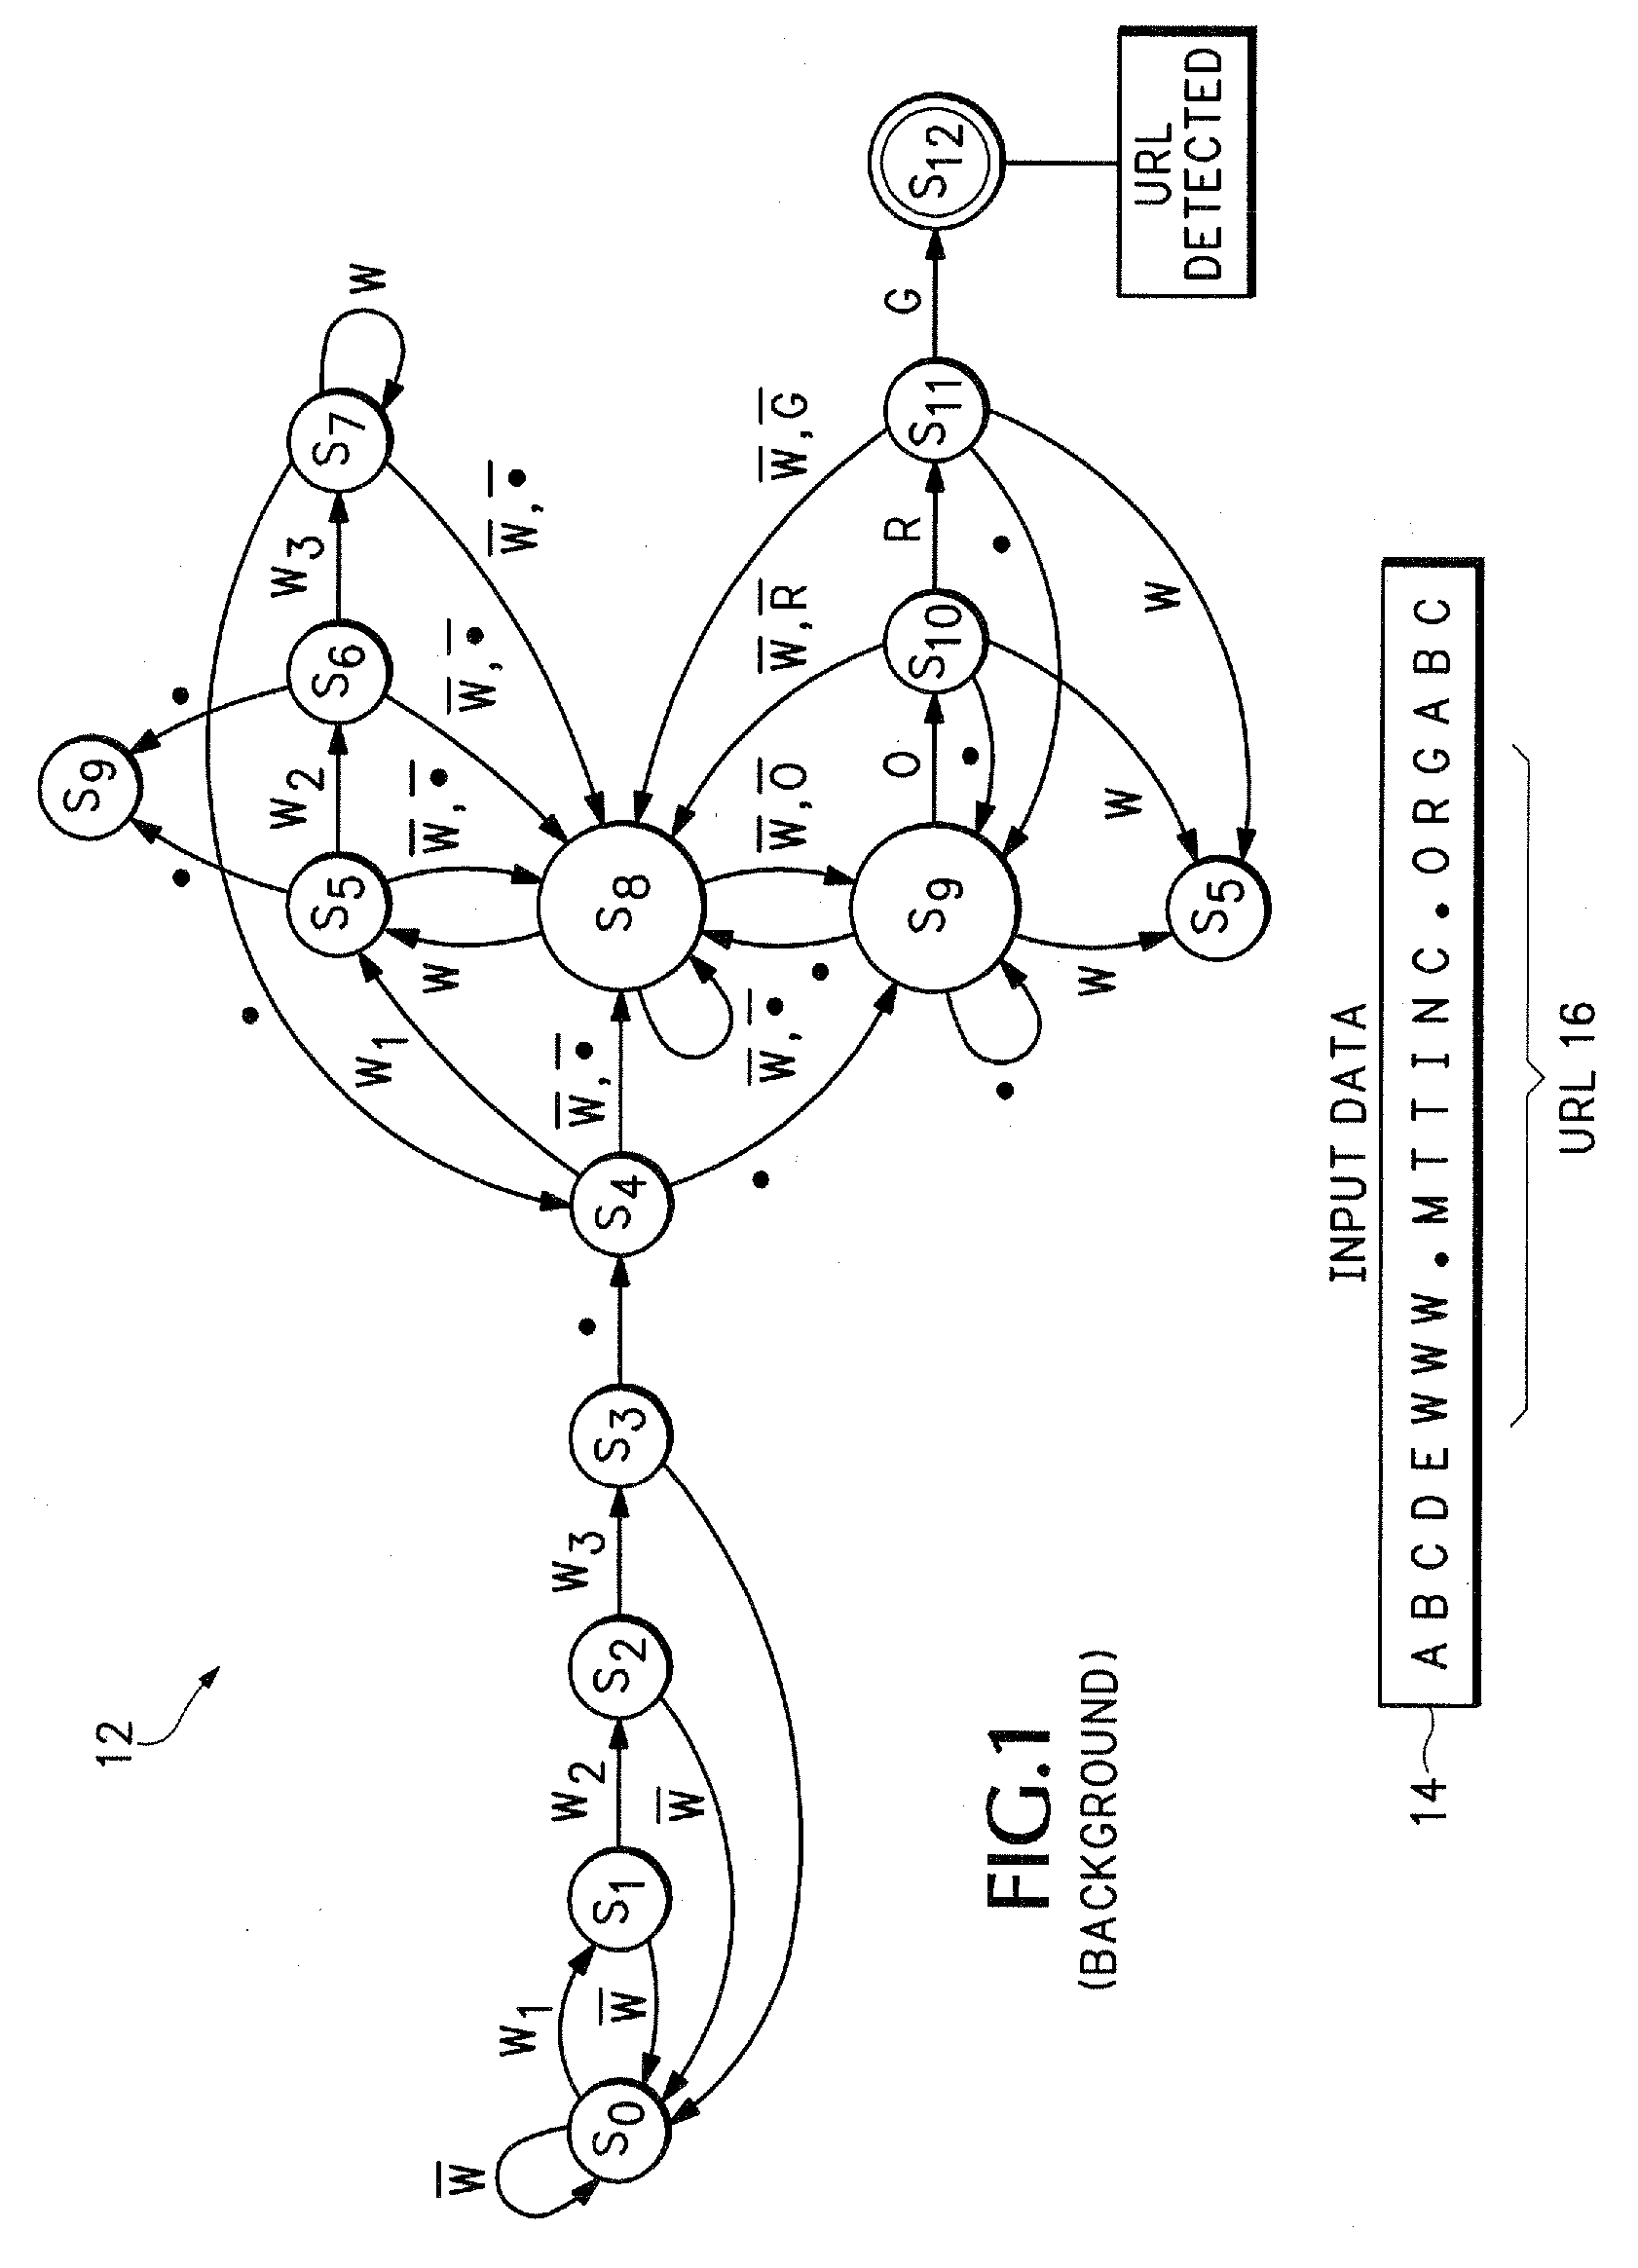 Method and apparatus for detecting semantic elements using a push down automaton